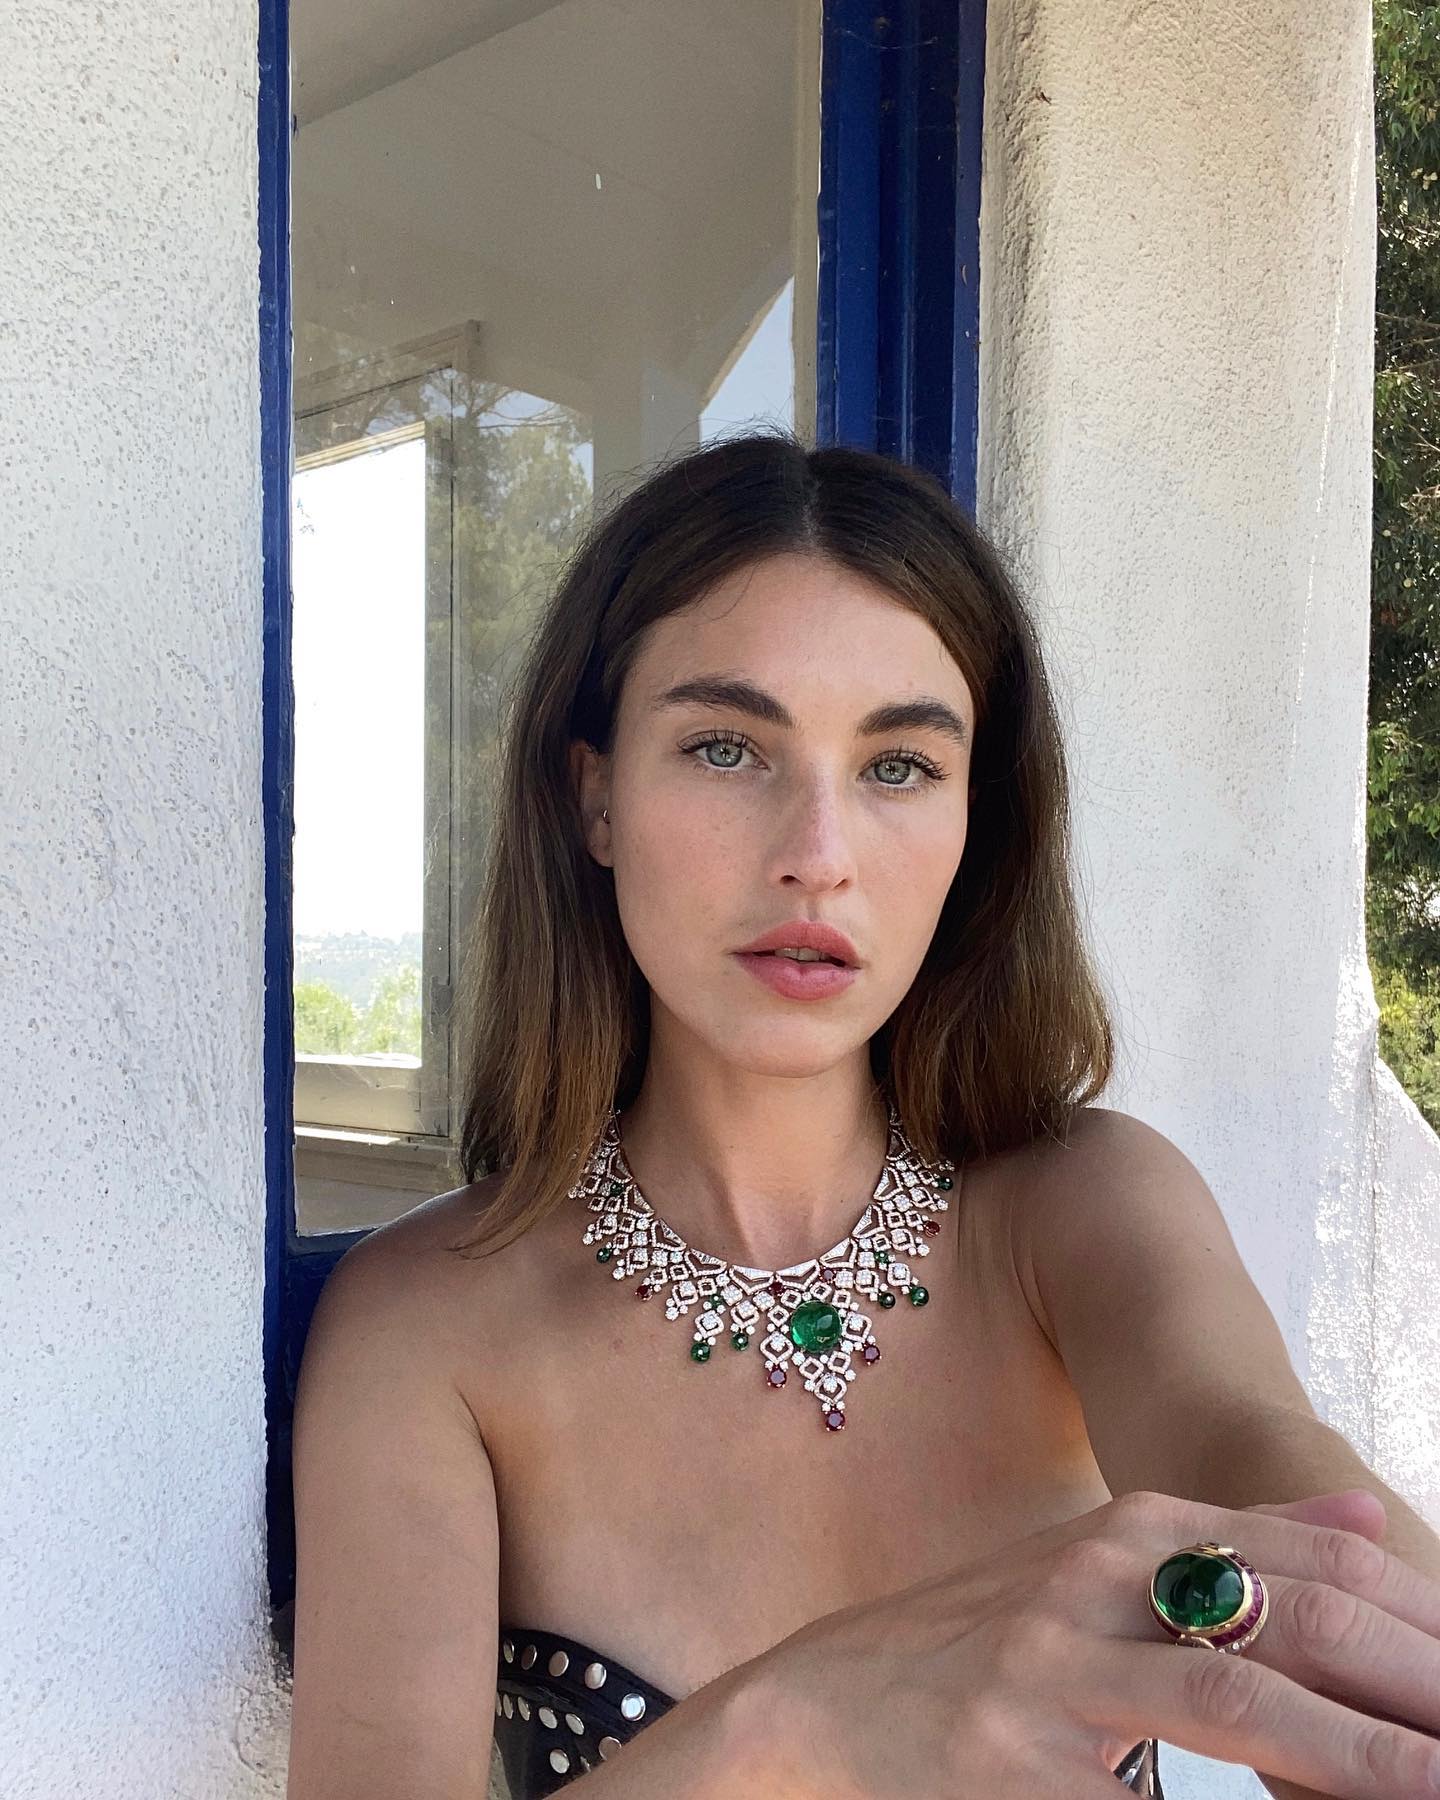 Photos n°2 : Rainey Qualley Showing Off the Jewels!